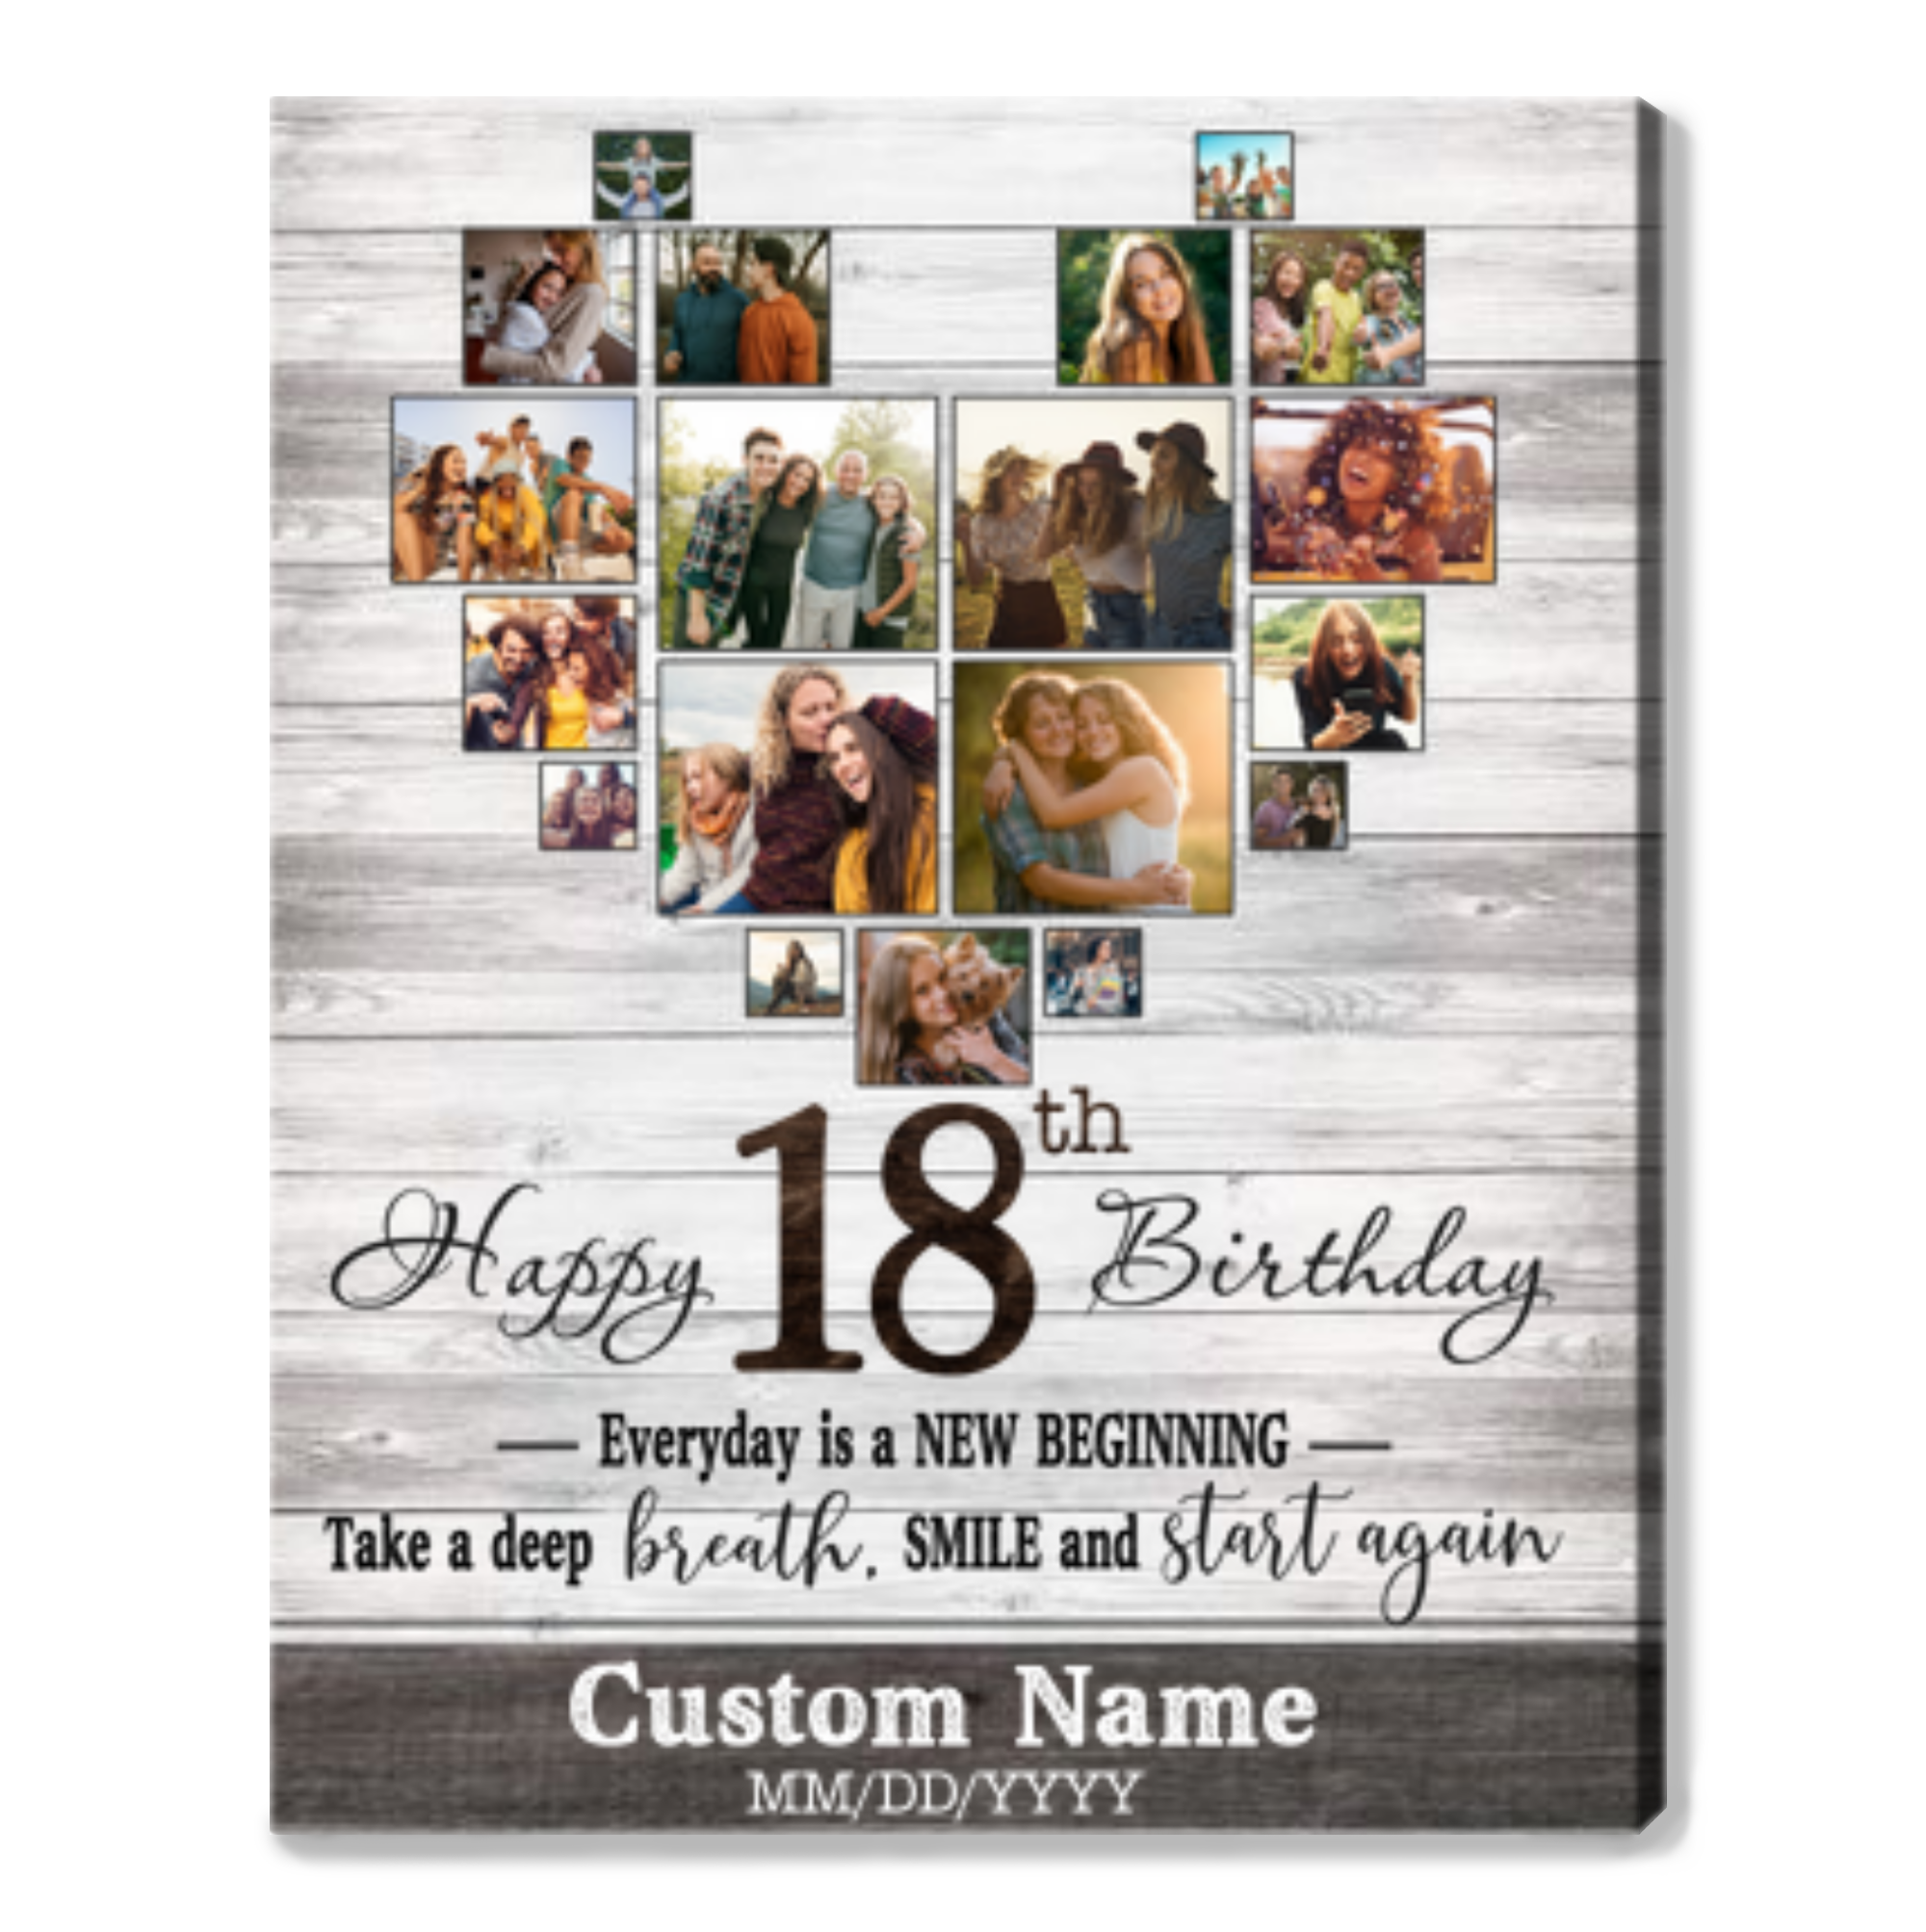 Customized Photo 18th Birthday Canvas 18th Gift Idea For Woman